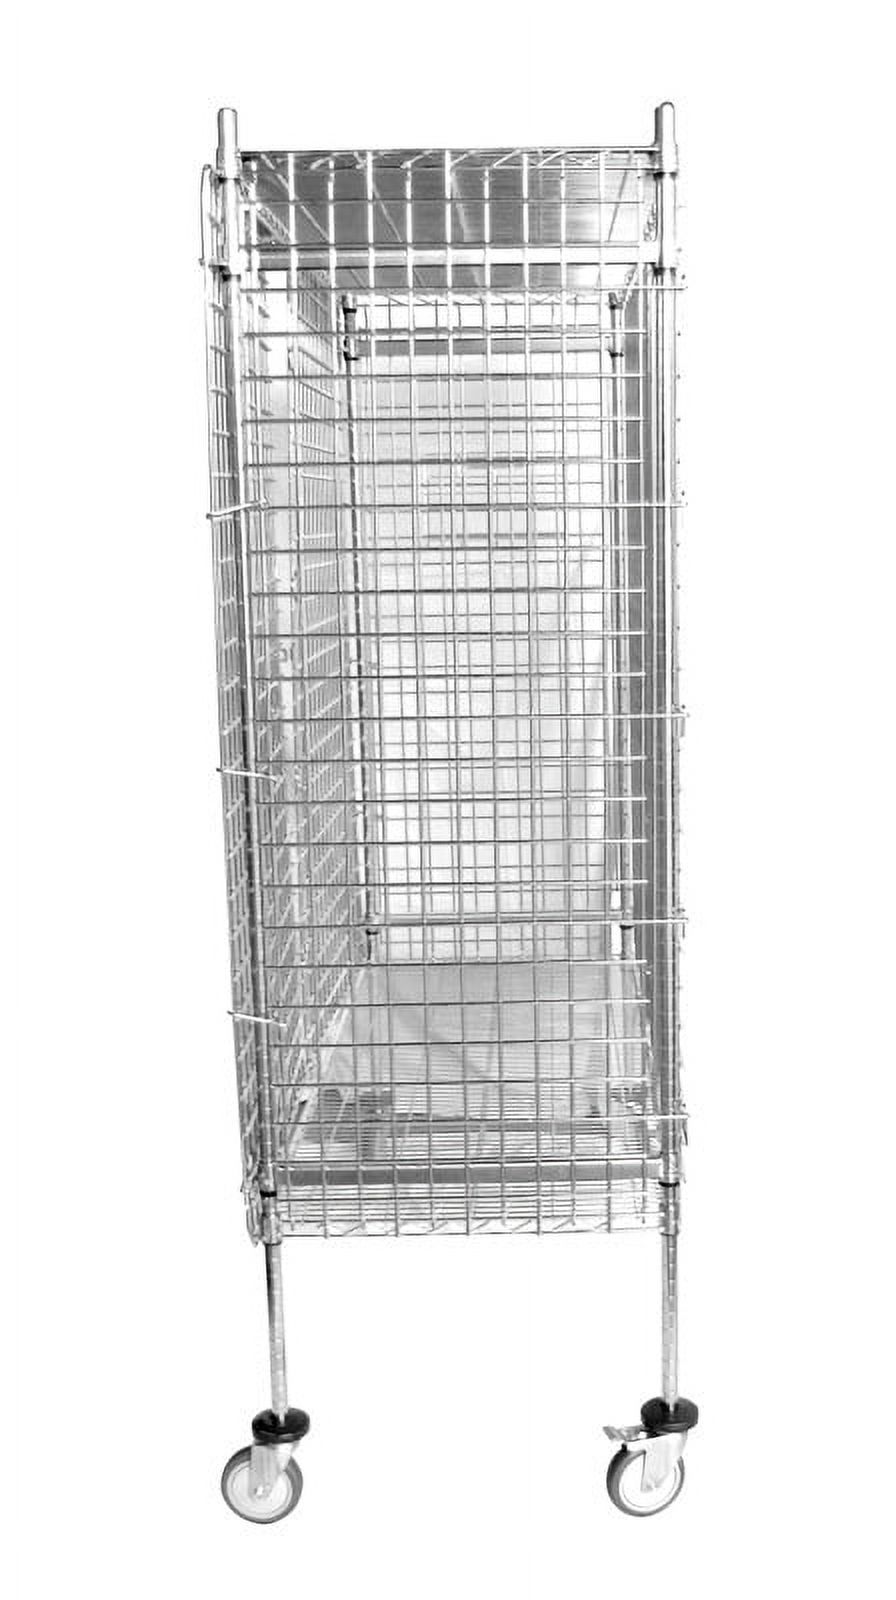 24" Deep x 60" Wide x 69" High Mobile Freezer Security Cage with 3 Interior Shelves - image 2 of 5